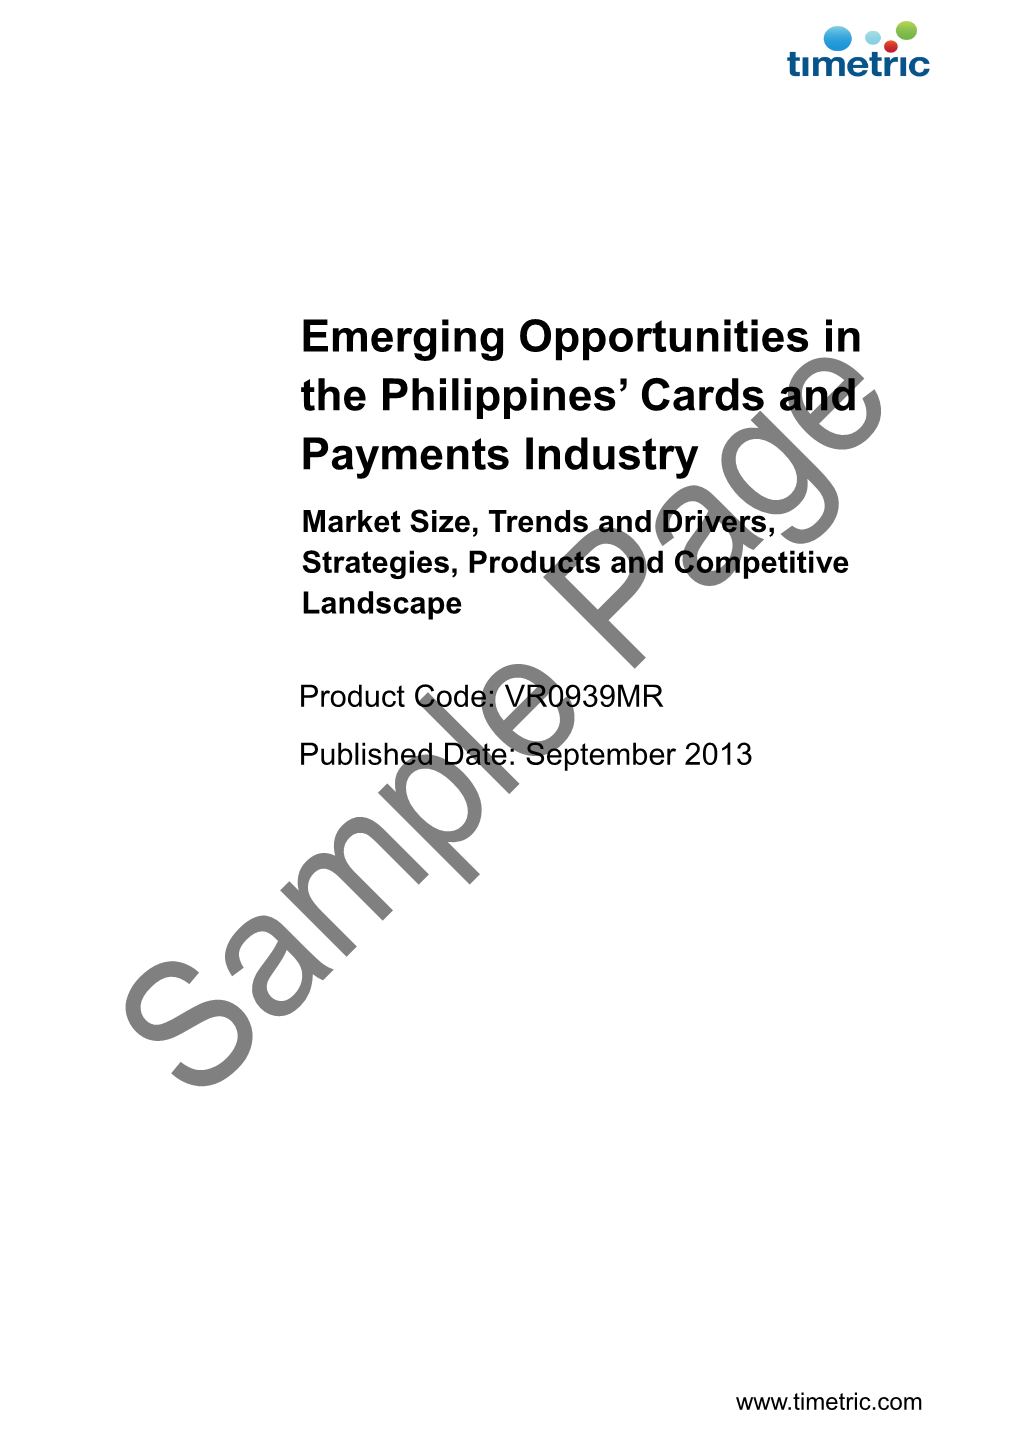 Emerging Opportunities in the Philippines' Cards and Payments